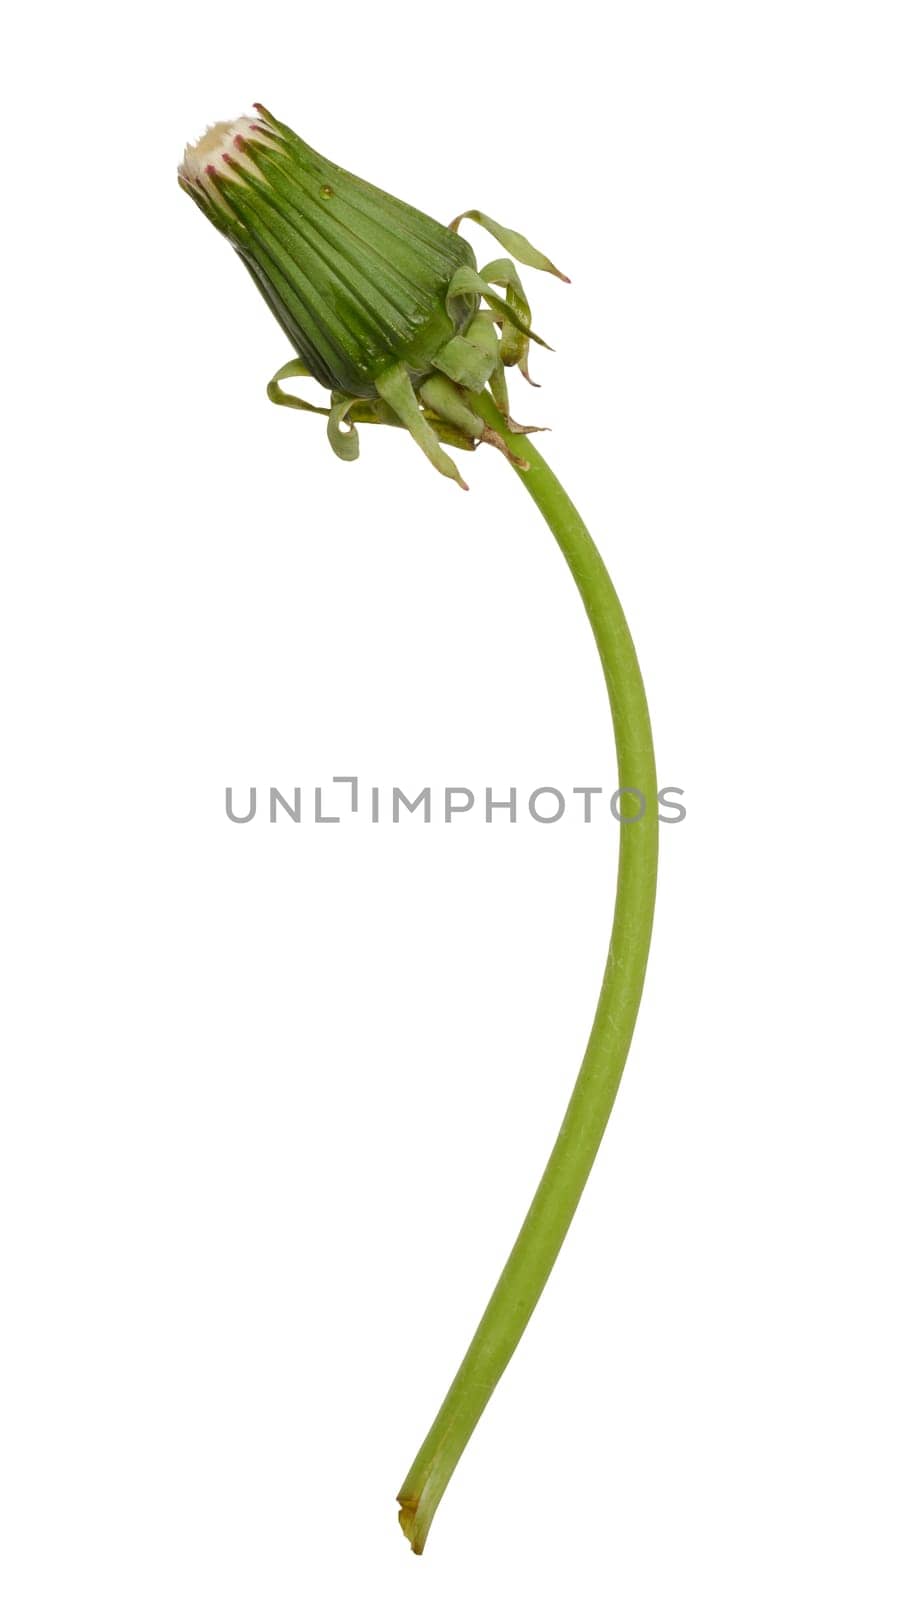 Dandelion on a long green stem, isolated background by ndanko